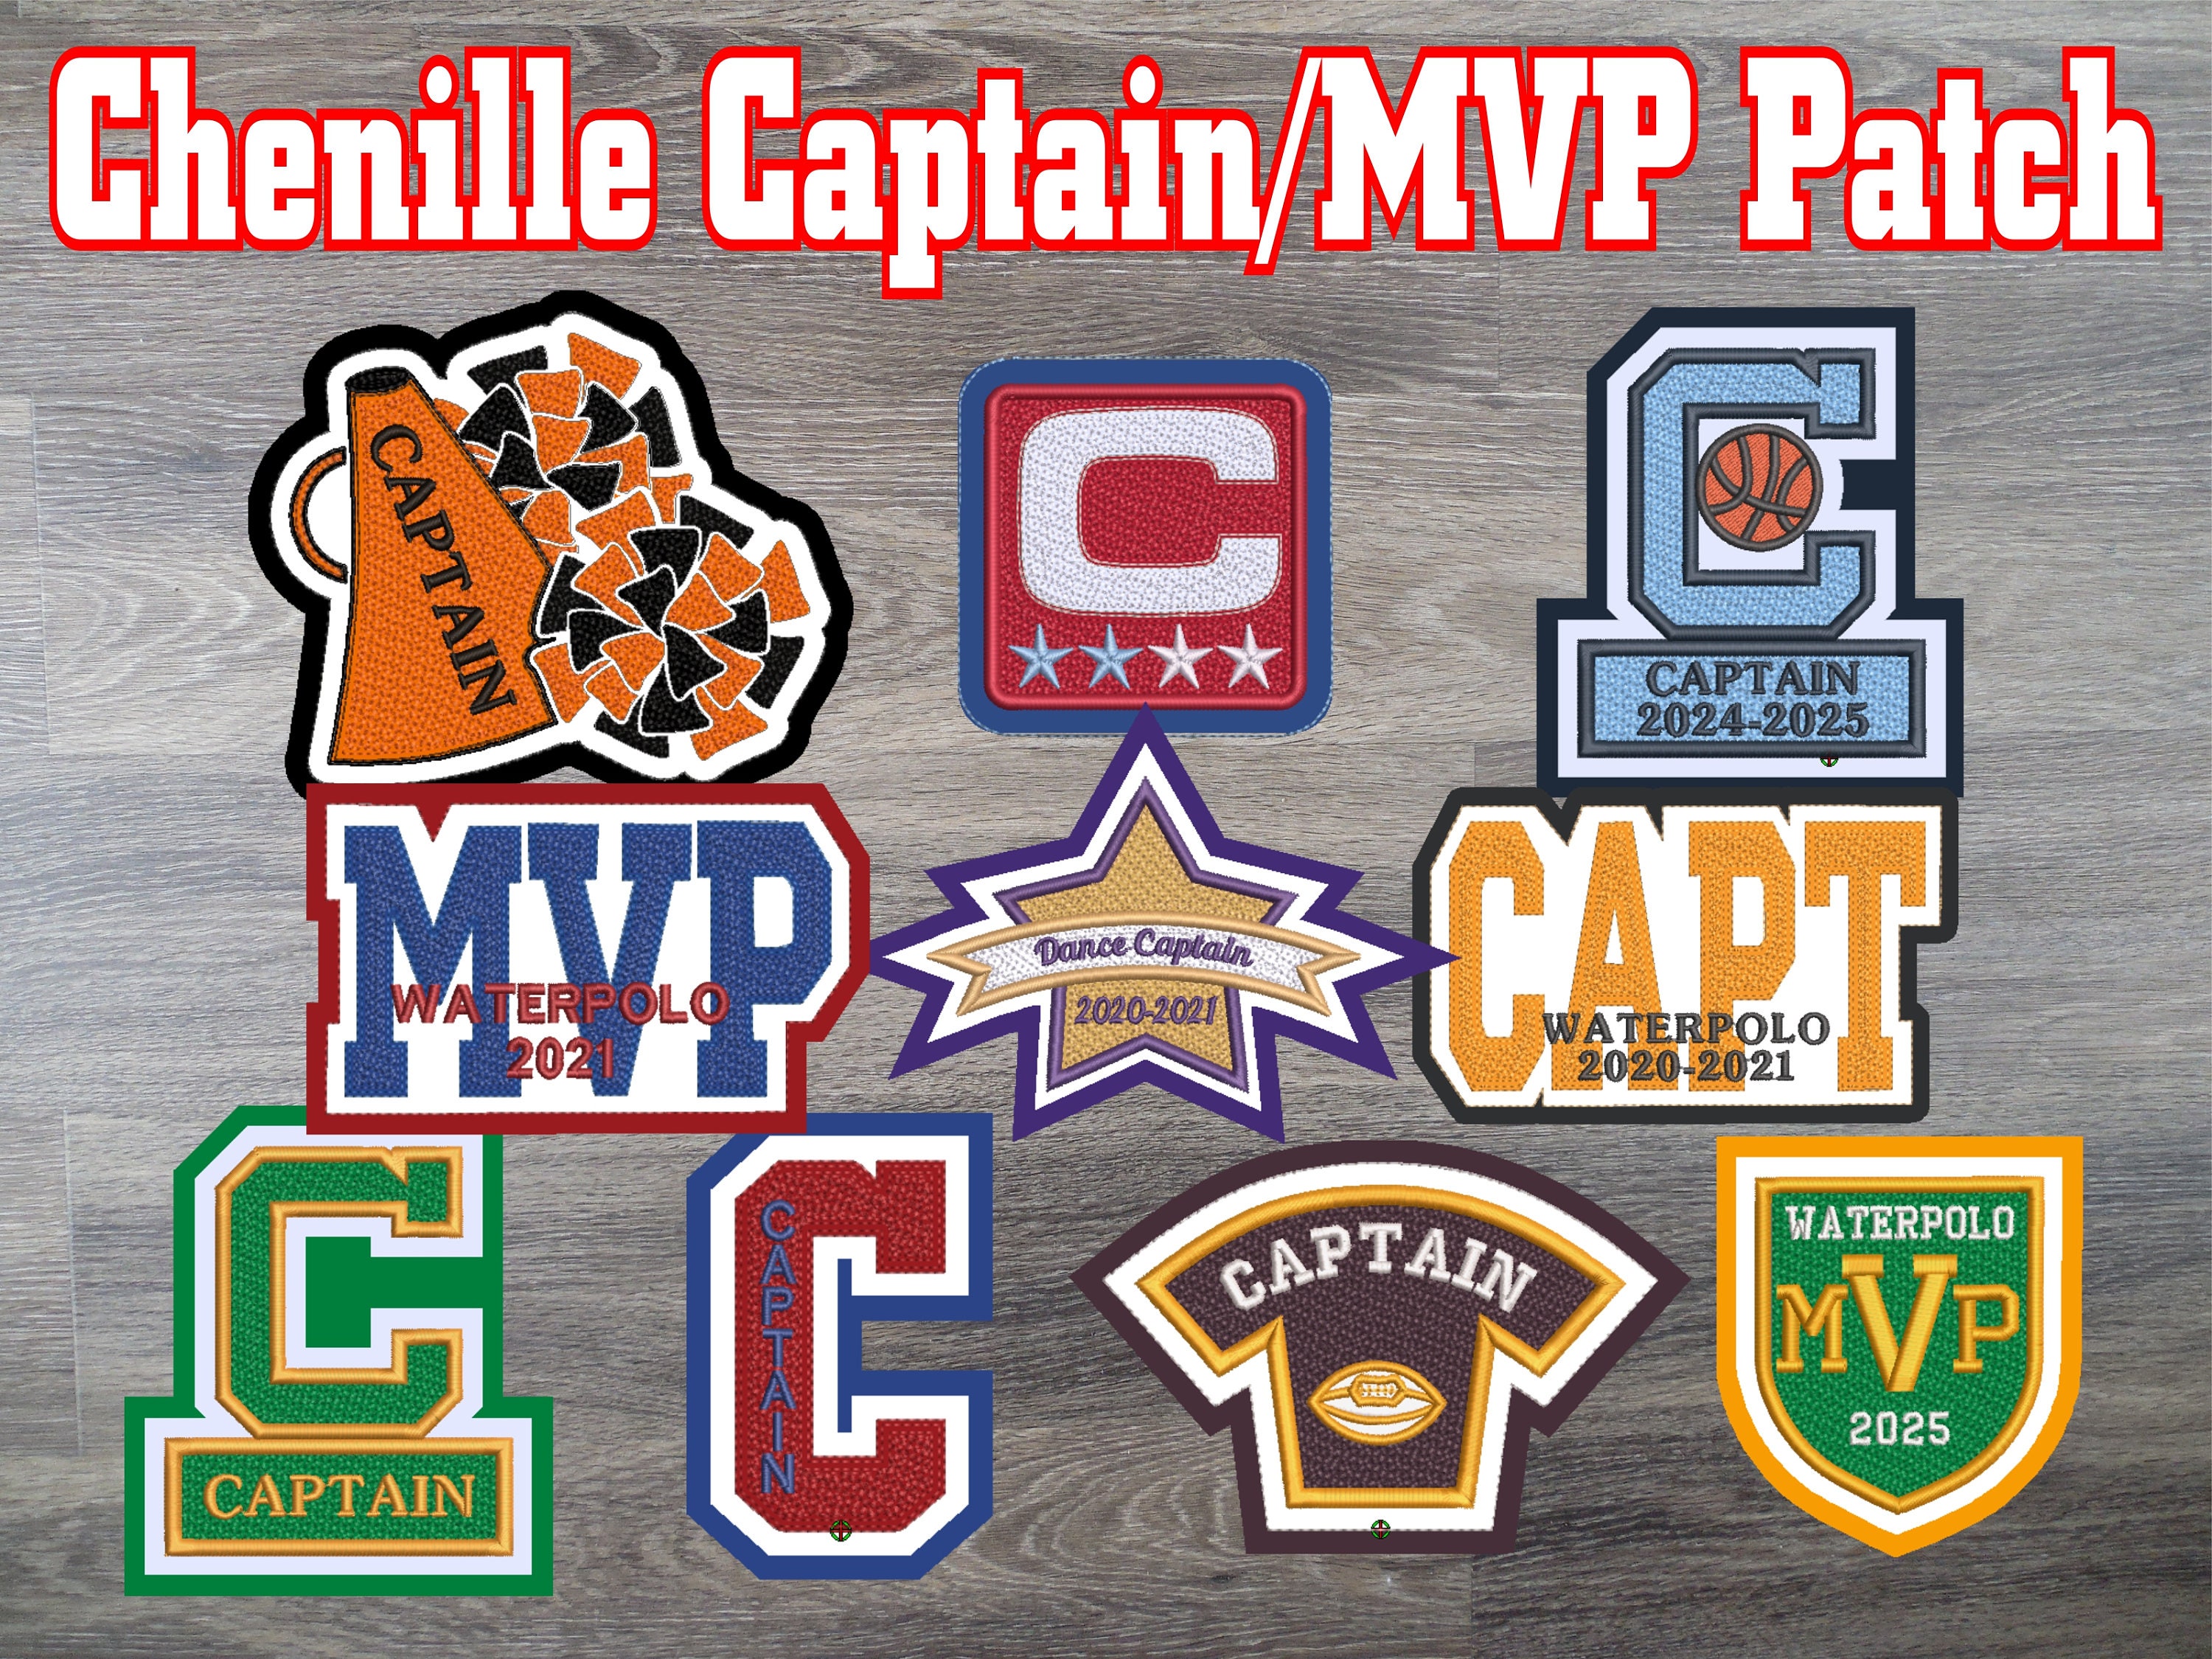 Captain/mvp Patch Chenille Letterman Jacket Patch made in USA 